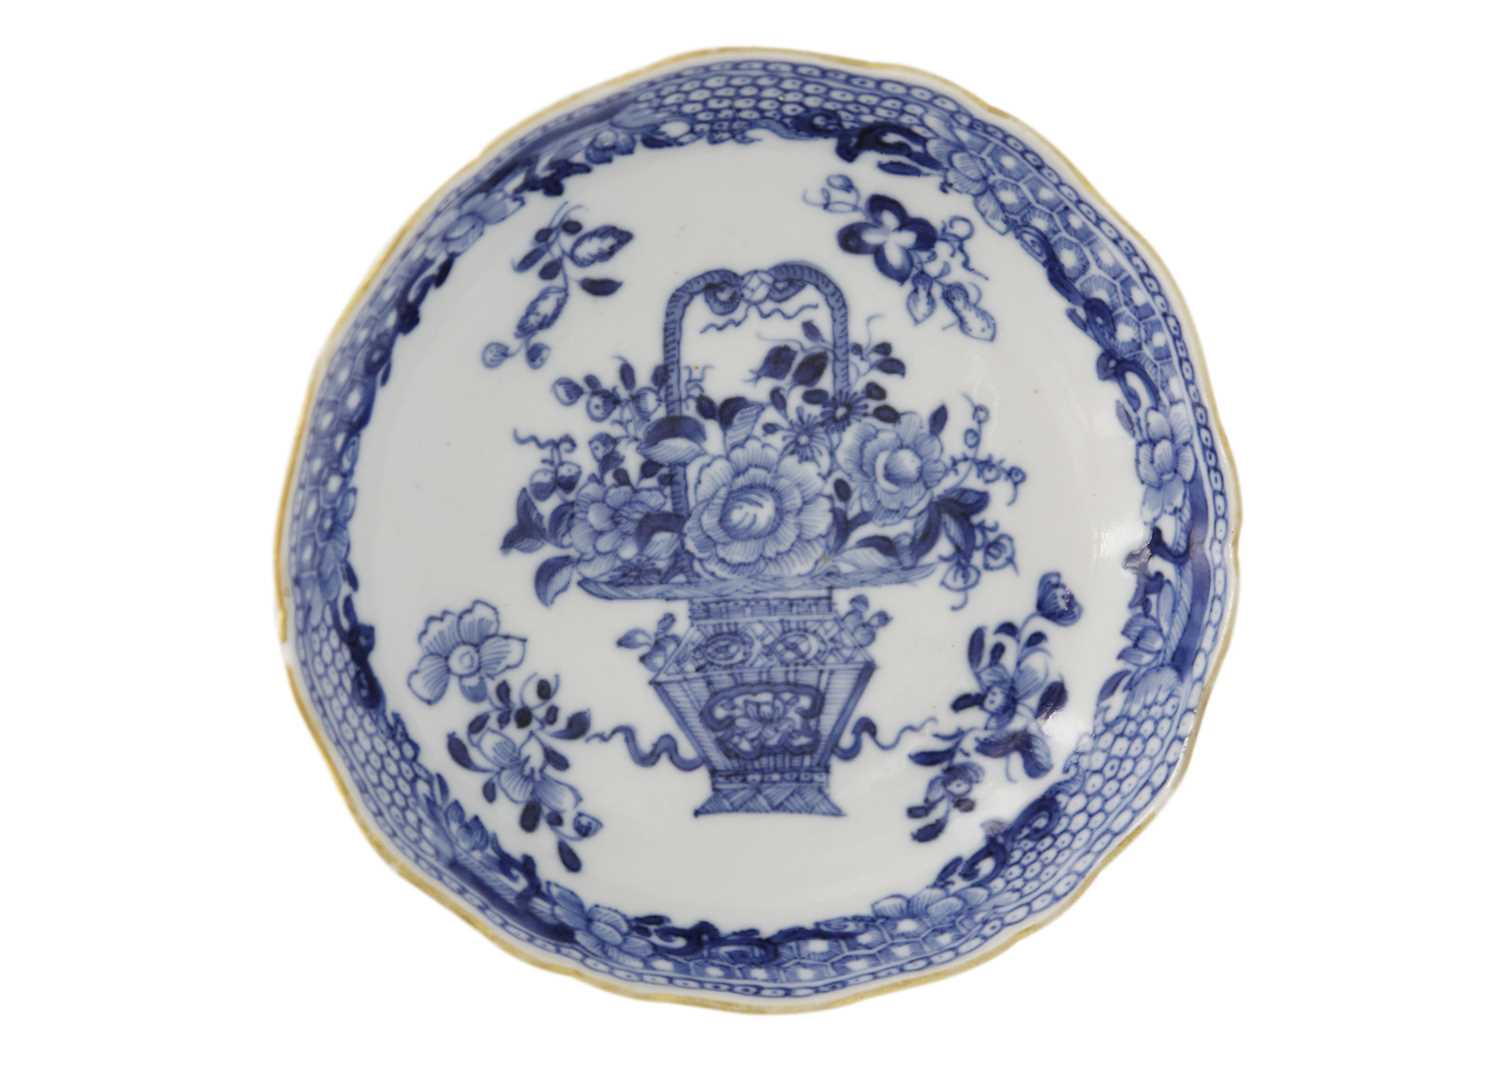 A pair of Chinese export blue and white porcelain dishes, 18th century. - Image 6 of 6